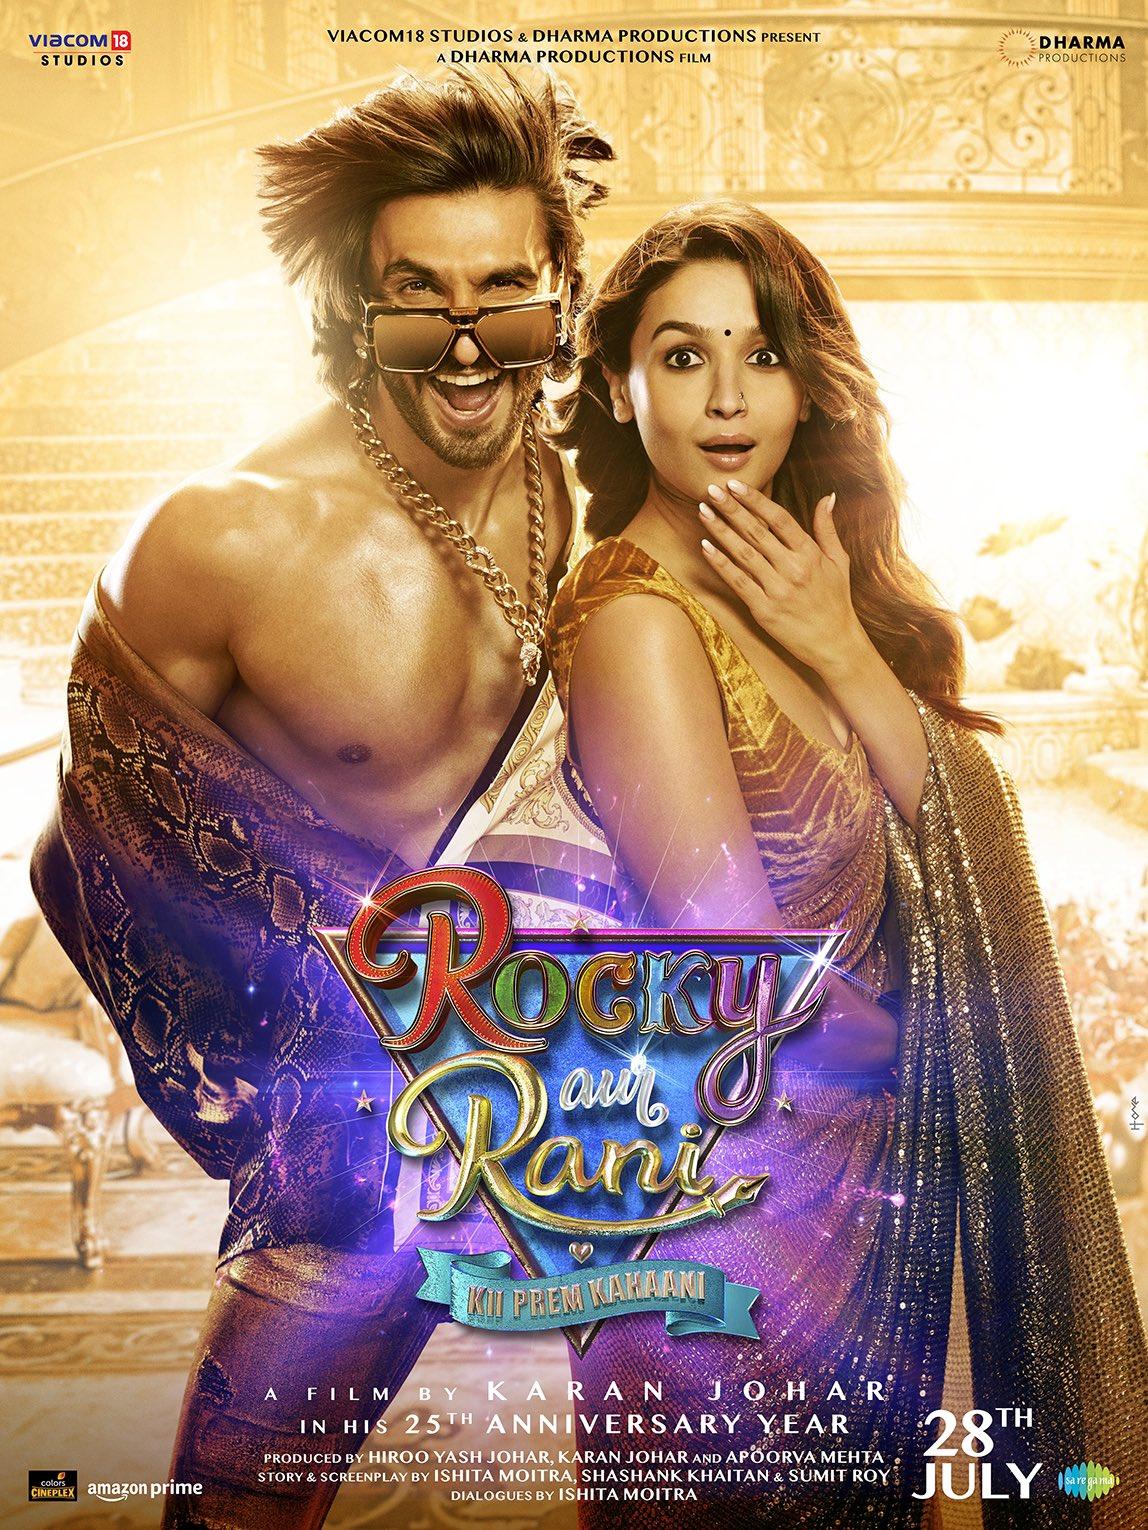 Rocky Aur Rani Ki Prem Kahani is not only a highly anticipated Bollywood film but also a beautiful representation of a cross-cultural love story. The film brings together two iconic actors, Ranveer Singh and Alia Bhatt, portraying the characters of Rocky and Rani, respectively.